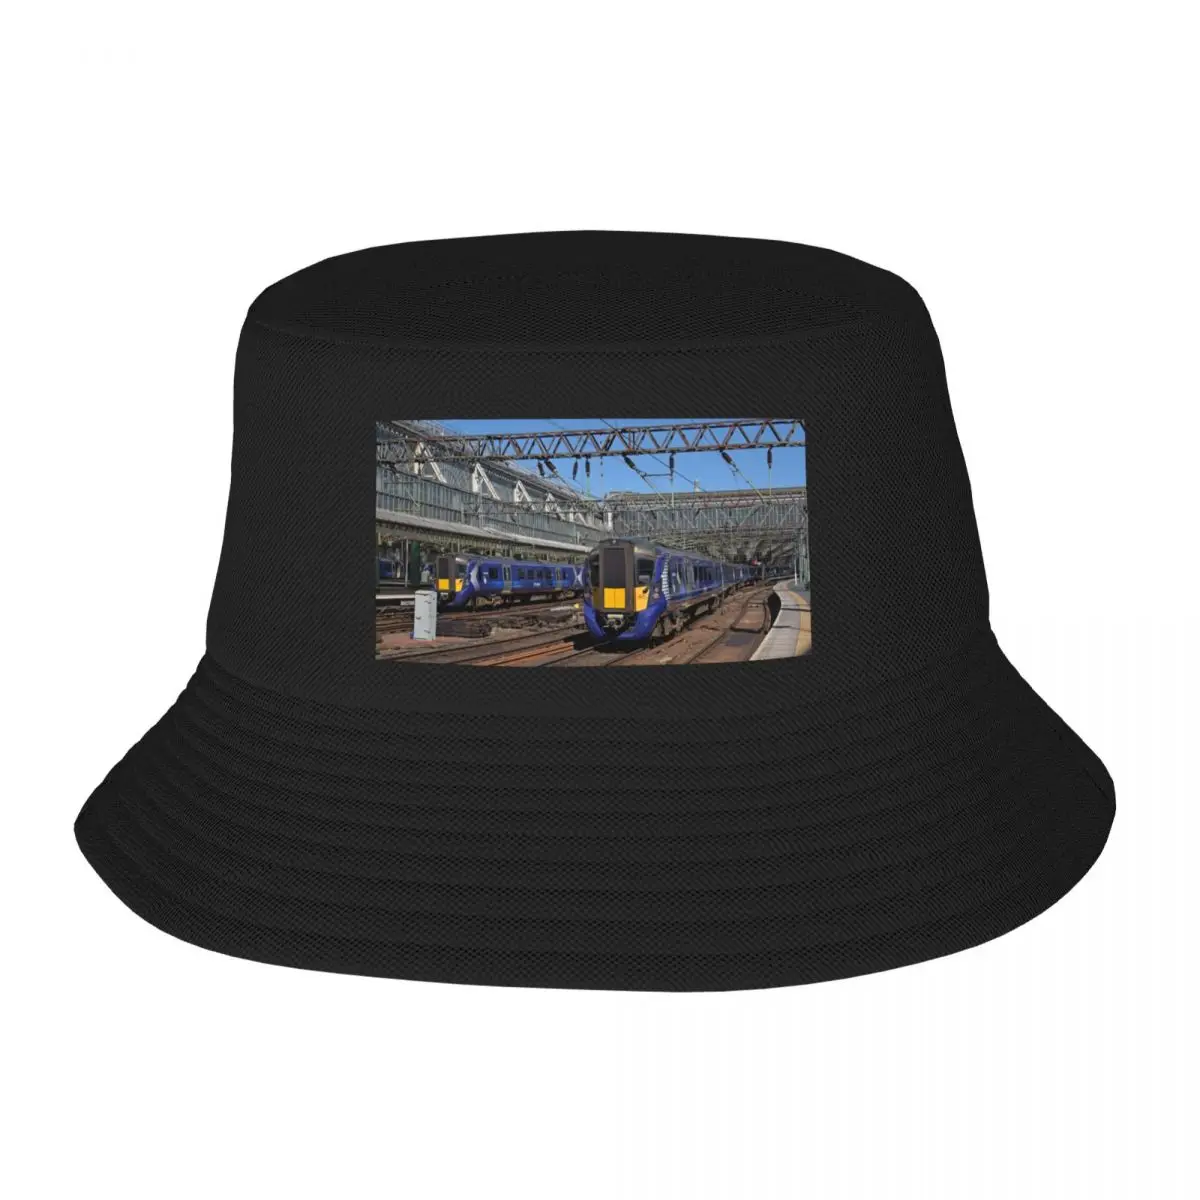 

New Scotrail Class 380 trains at Glasgow Central Station Bucket Hat Anime cute western hats Woman Cap Men's